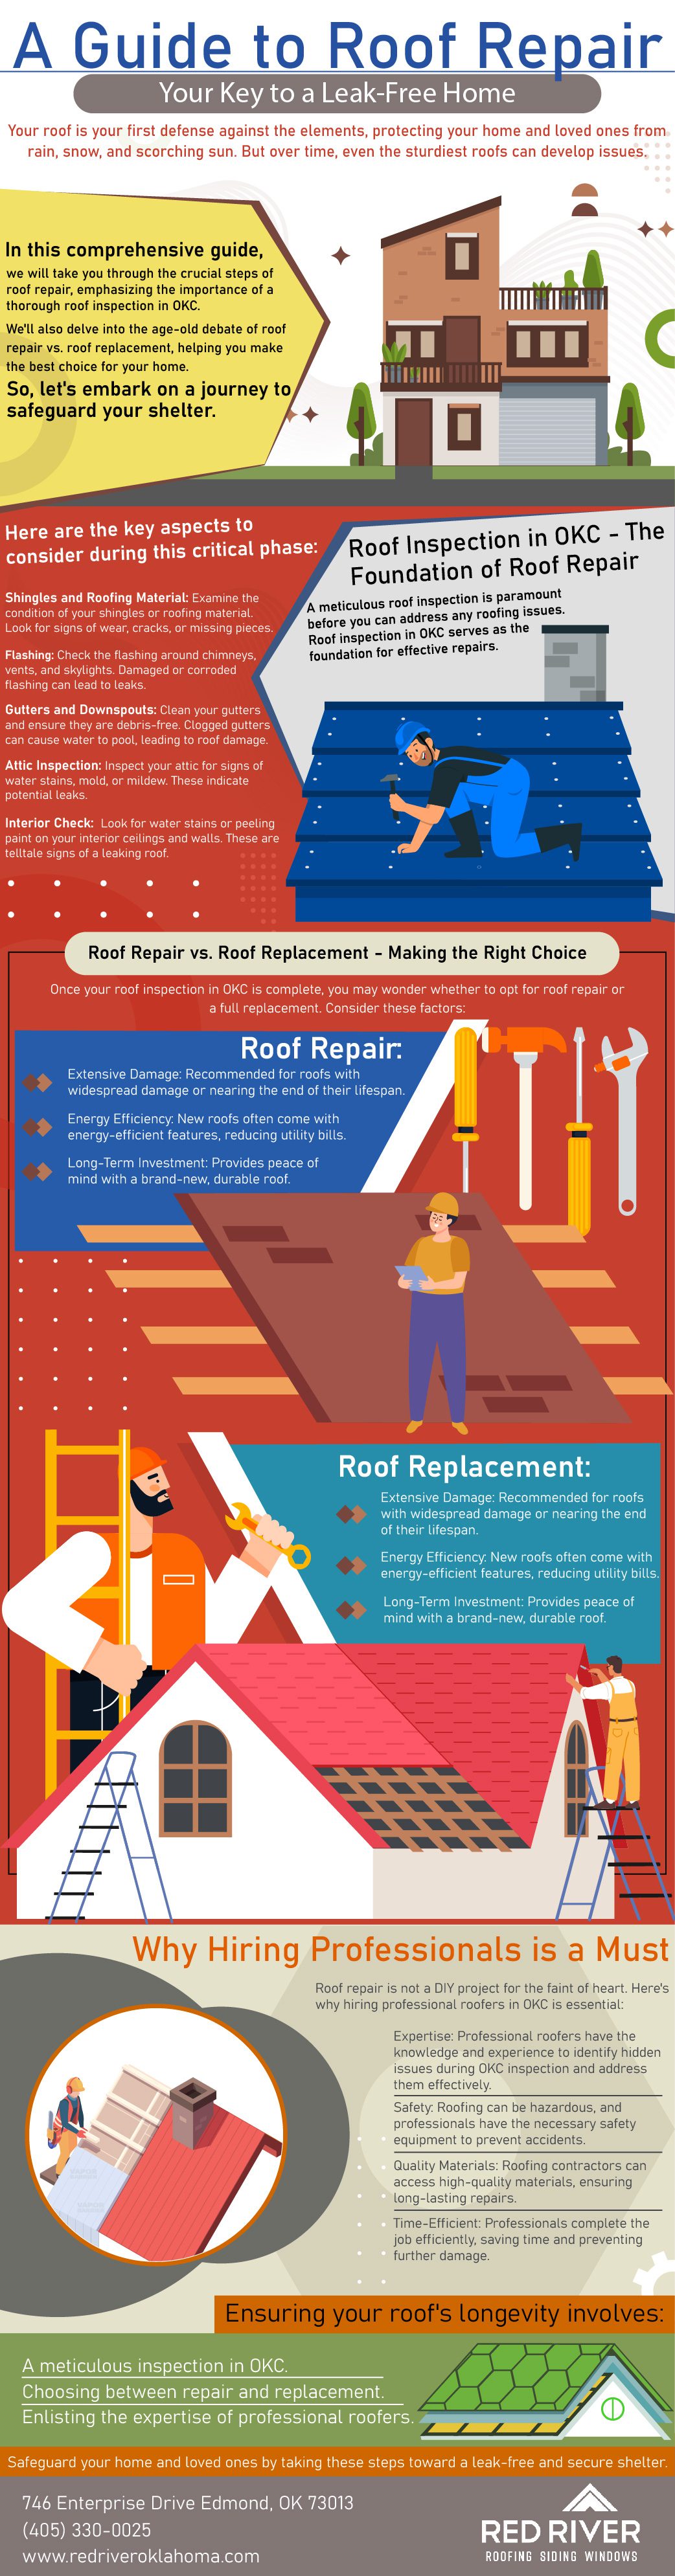 Roof Repair by Red River Roofing in OKC